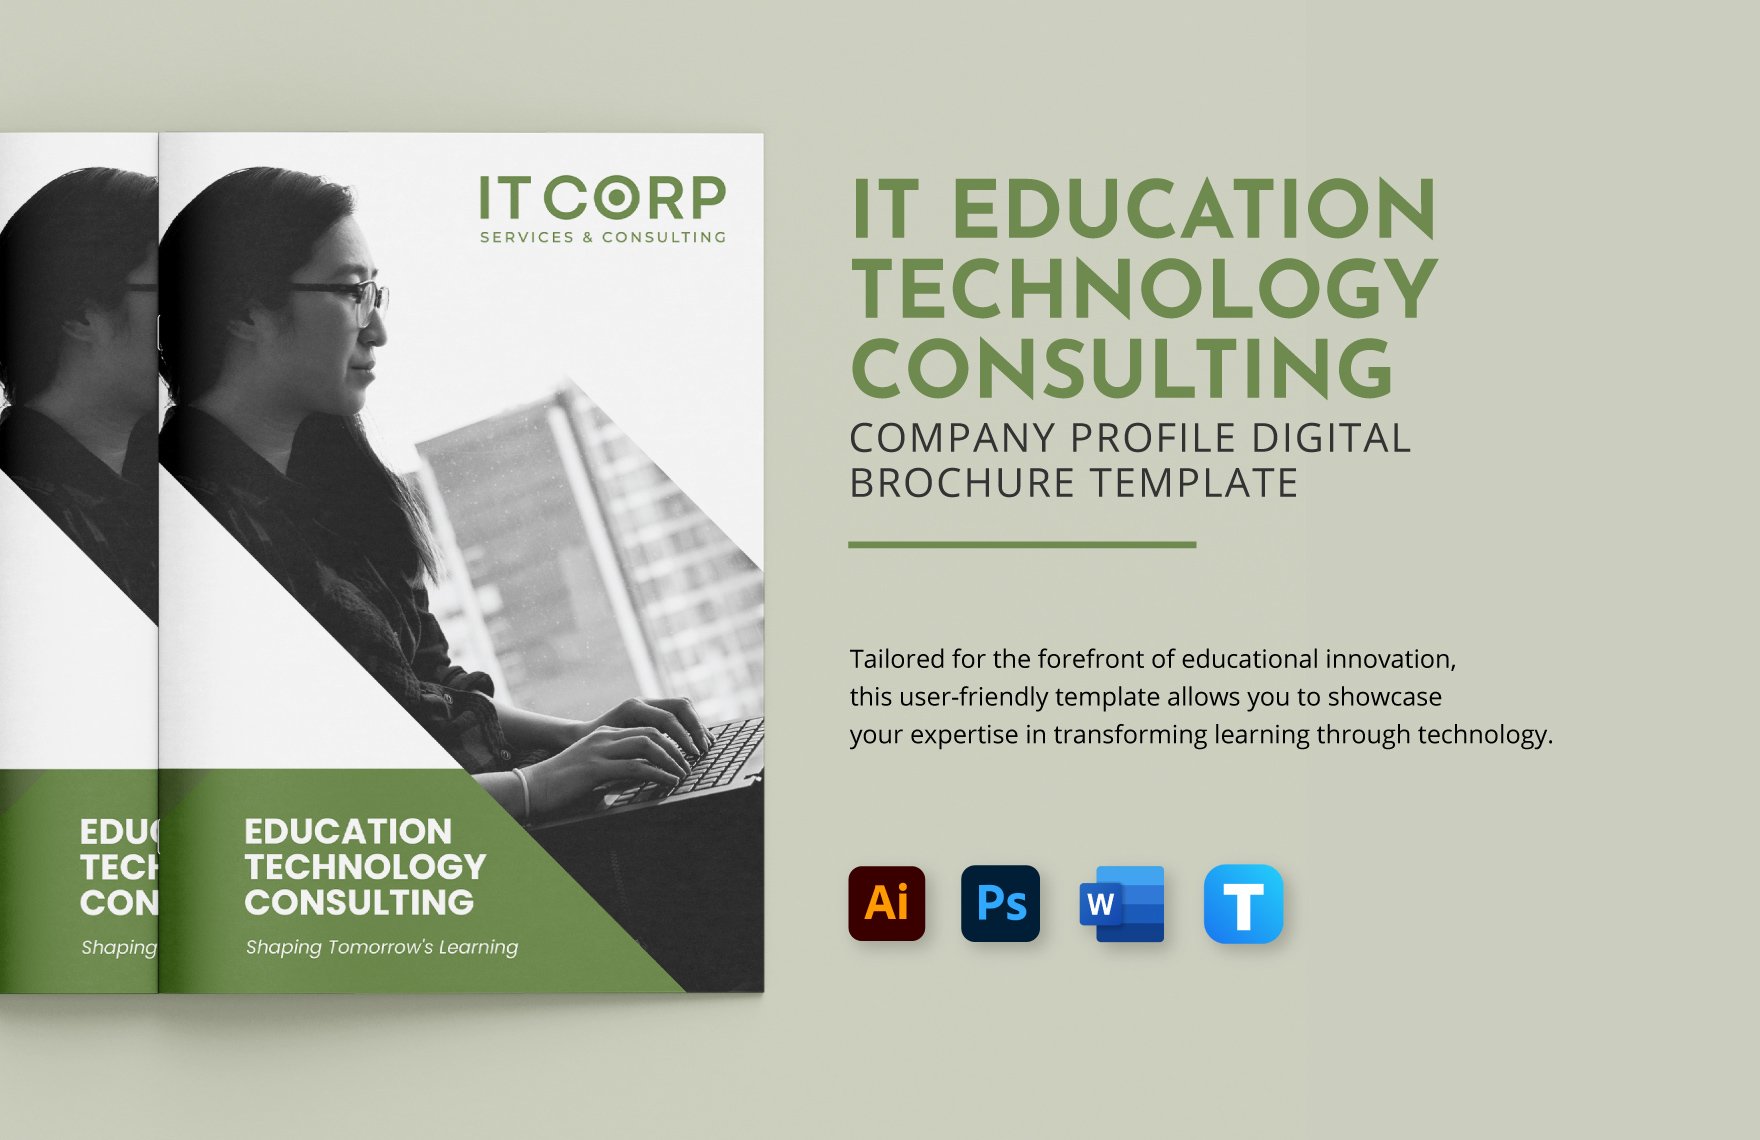 IT Education Technology Consulting Company Profile Digital Brochure Template in Word, Illustrator, PSD